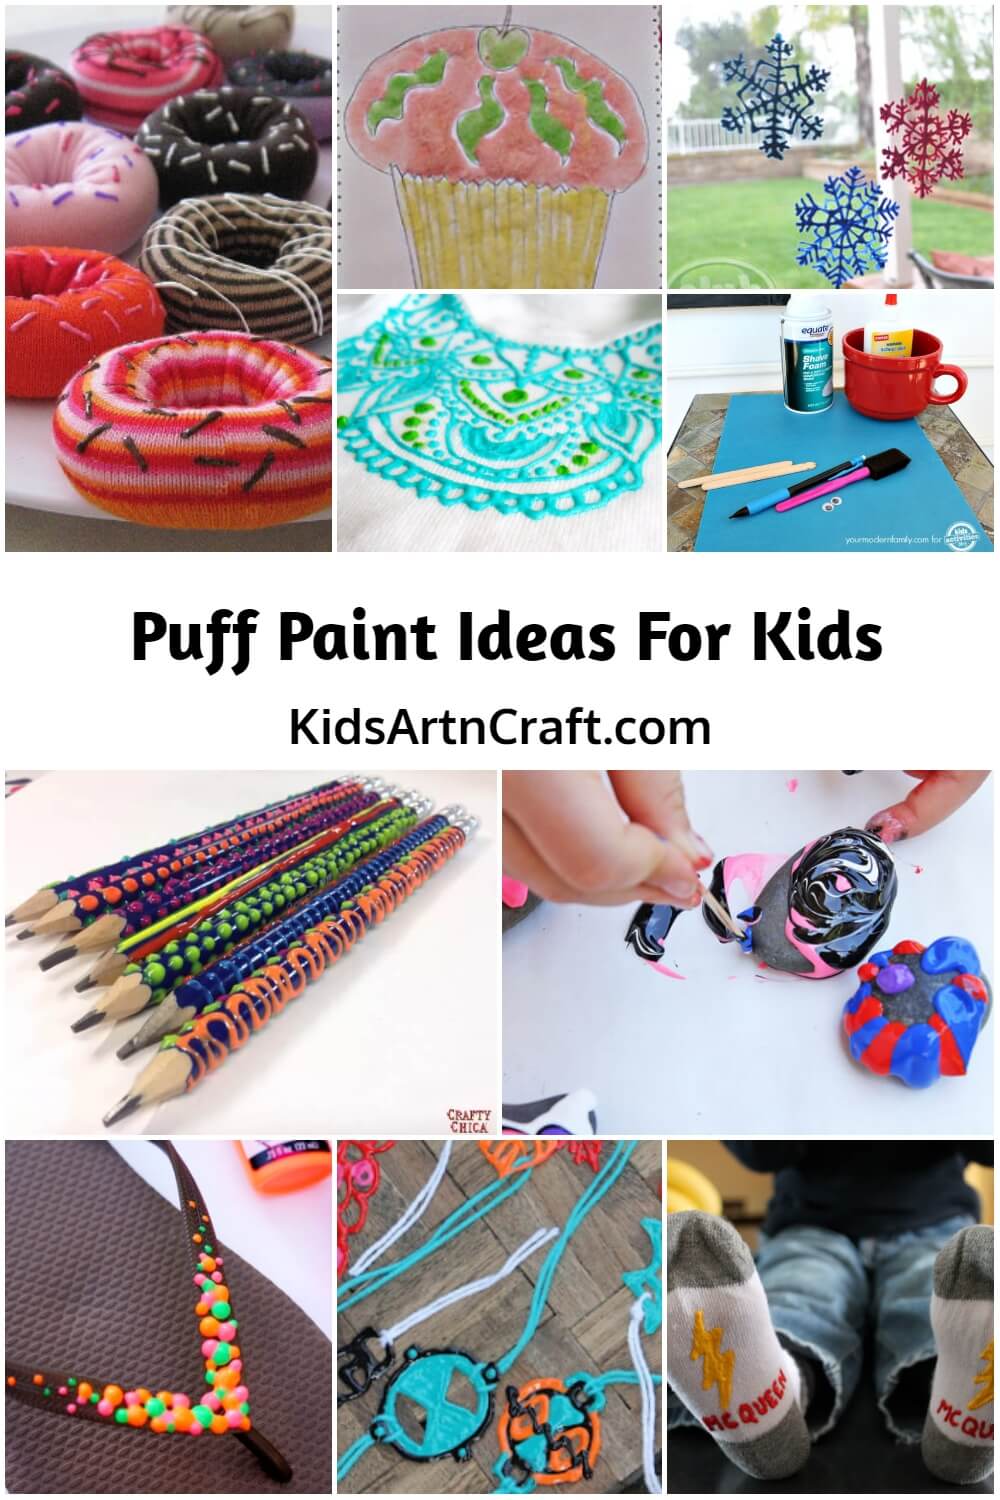 Puff Paint Ideas For Kids